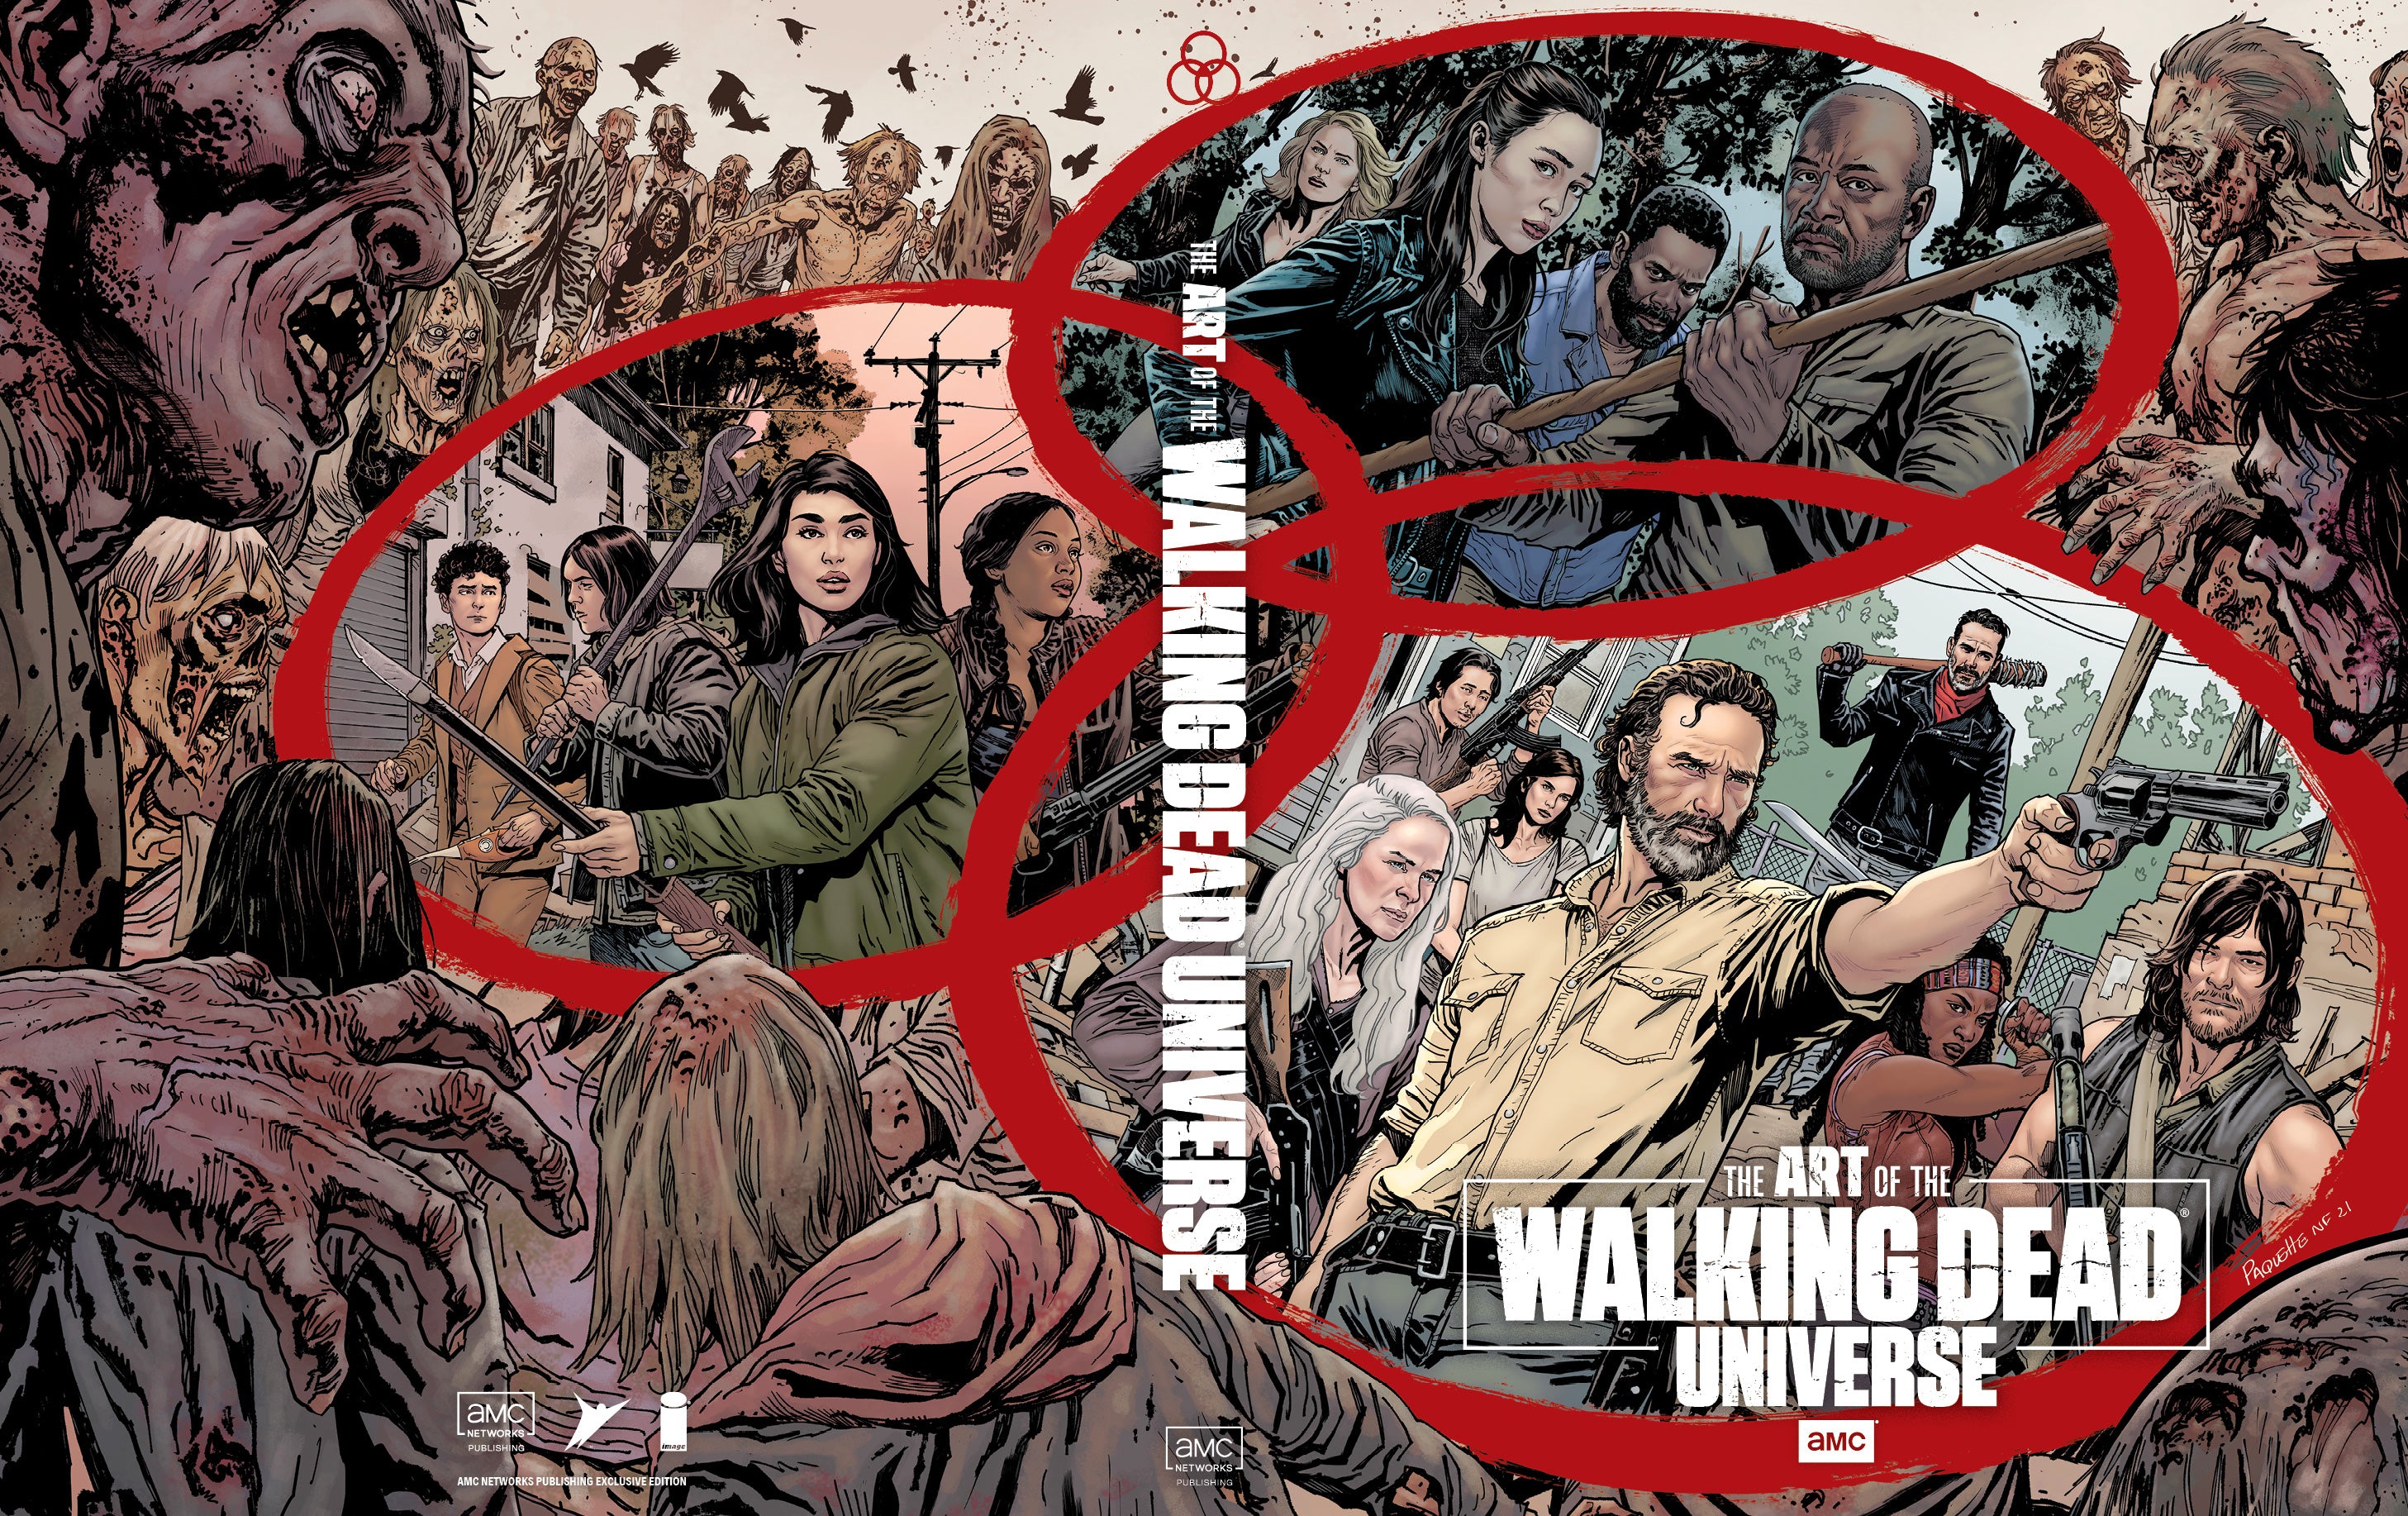 The Art of AMC's The Walking Dead Universe: AMC Exclusive Edition Book-1